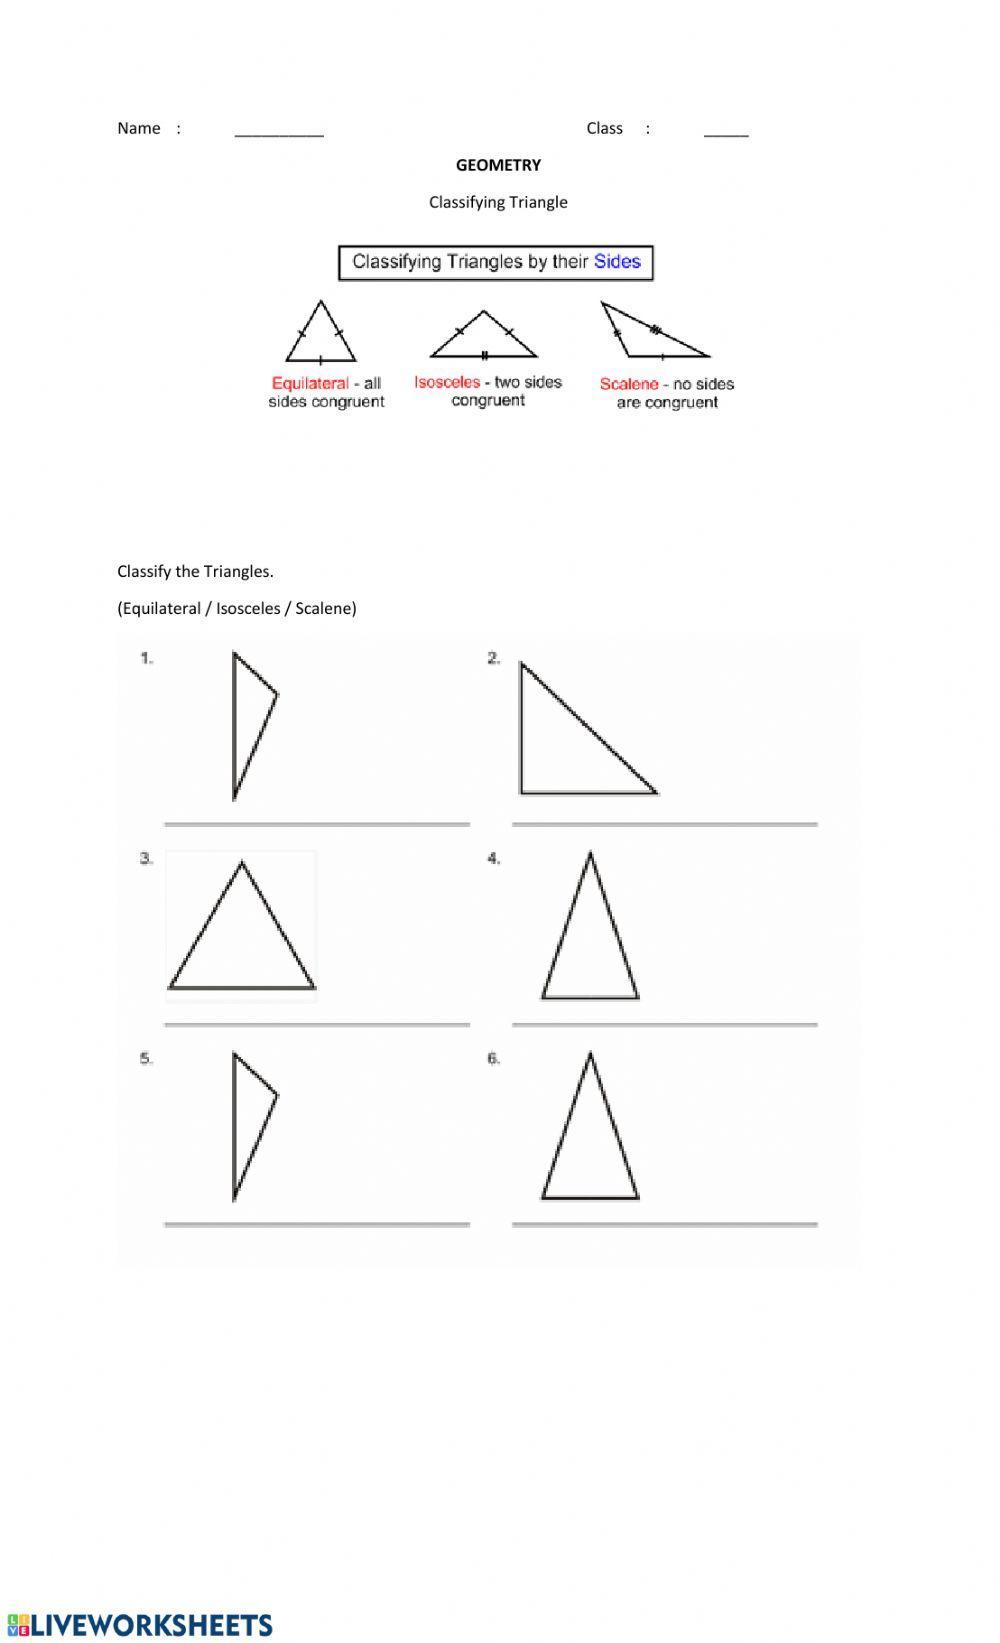 Classifying Triangles by Their Sides